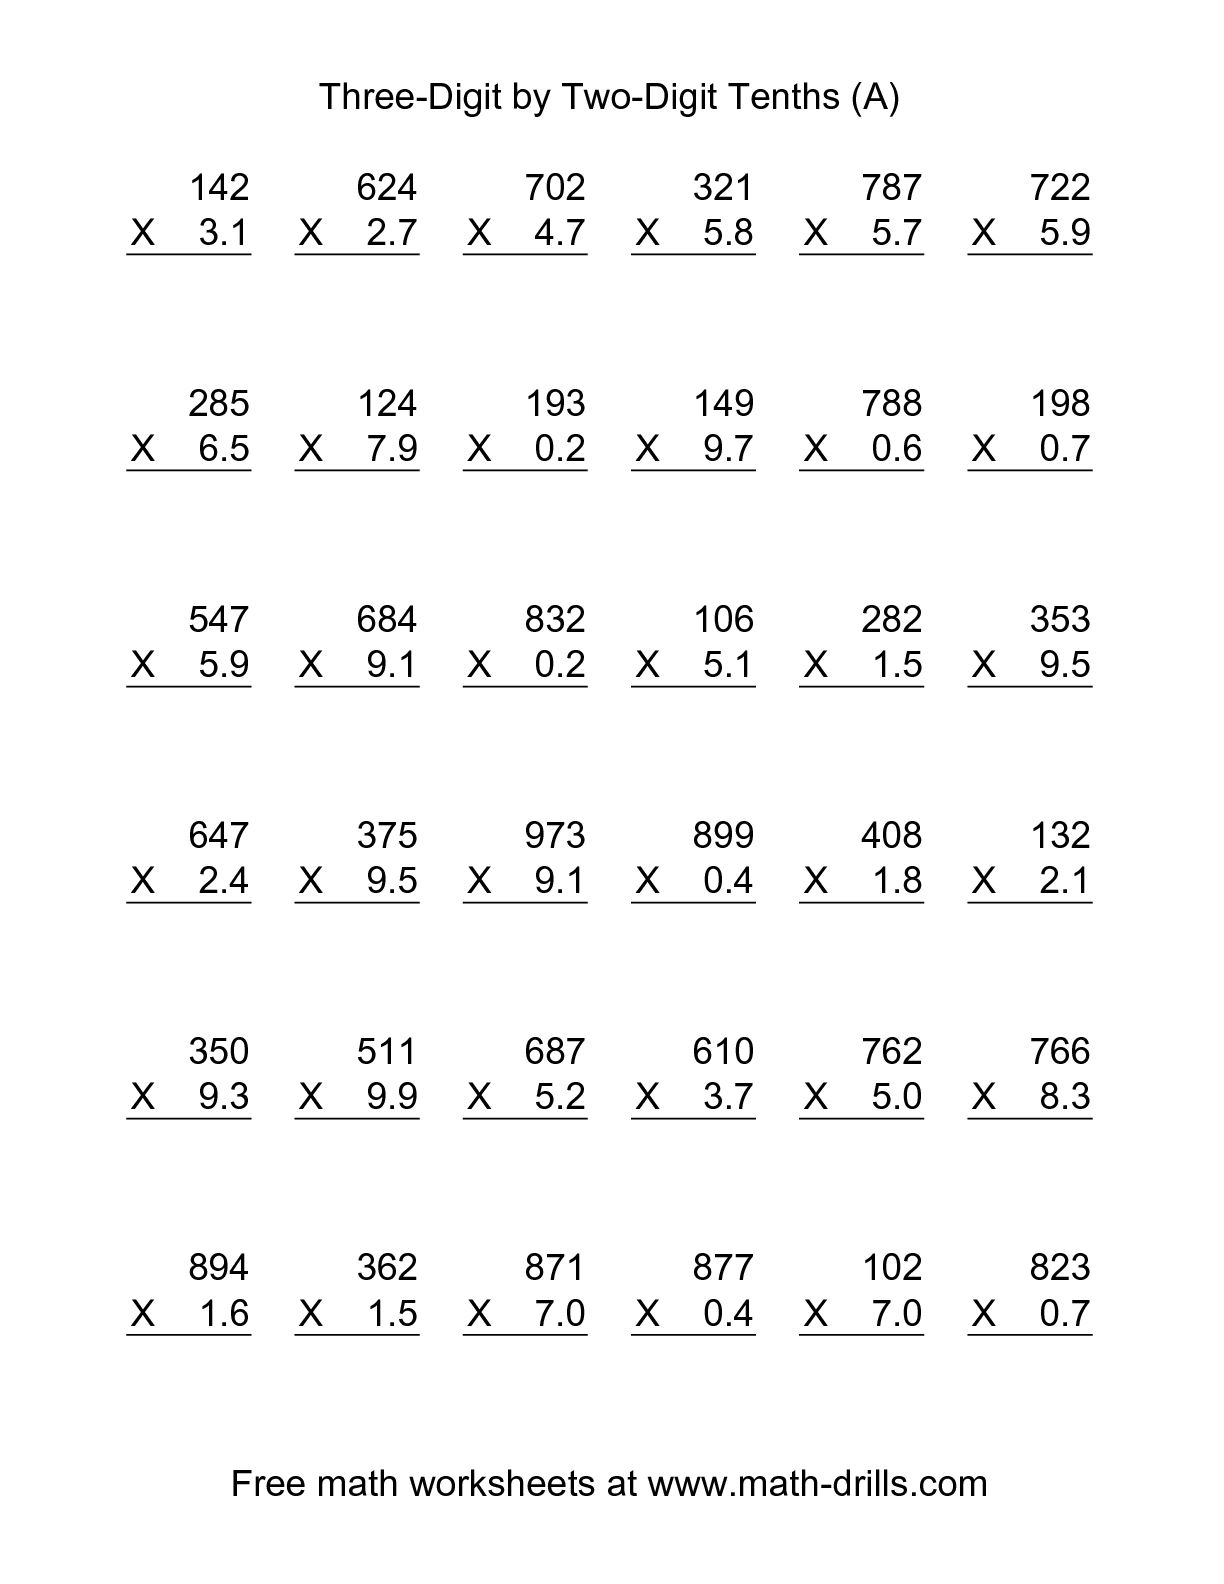 16-best-images-of-multiplying-whole-numbers-and-decimals-worksheet-multiplying-by-two-digit